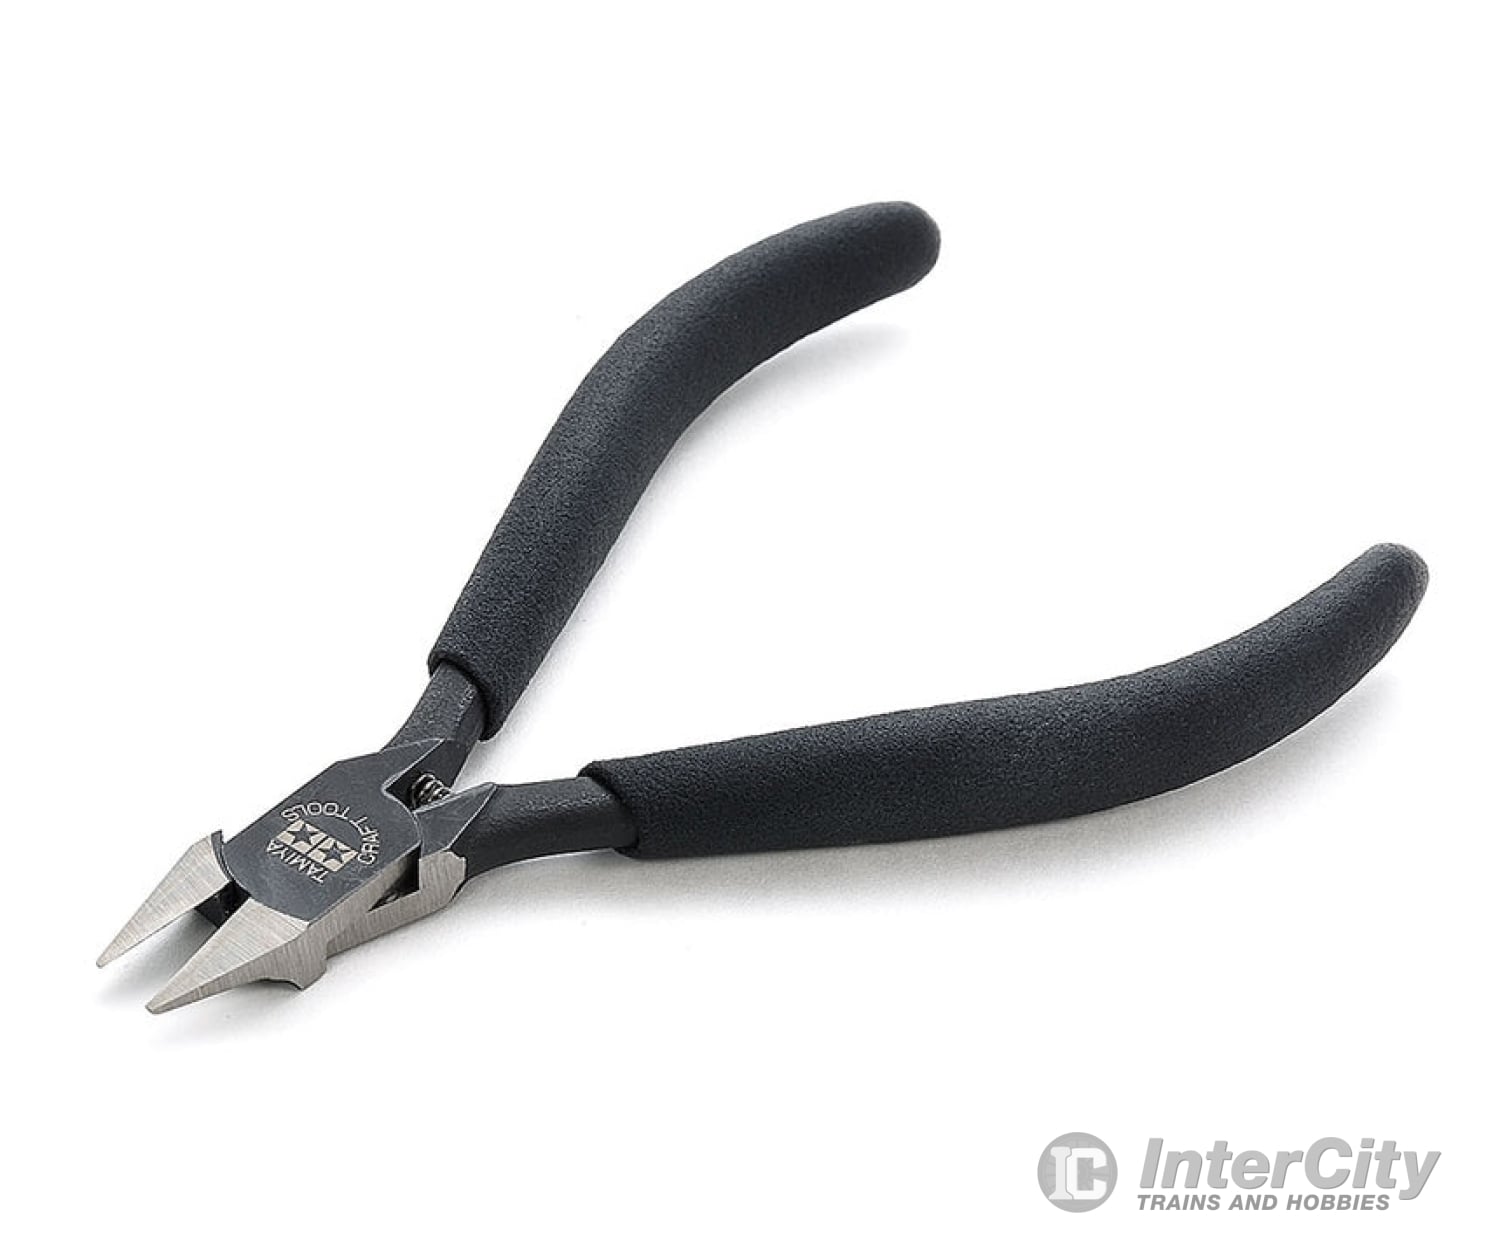 Tamiya 74035 Sharp Point Side Cutters For Plastics Tools